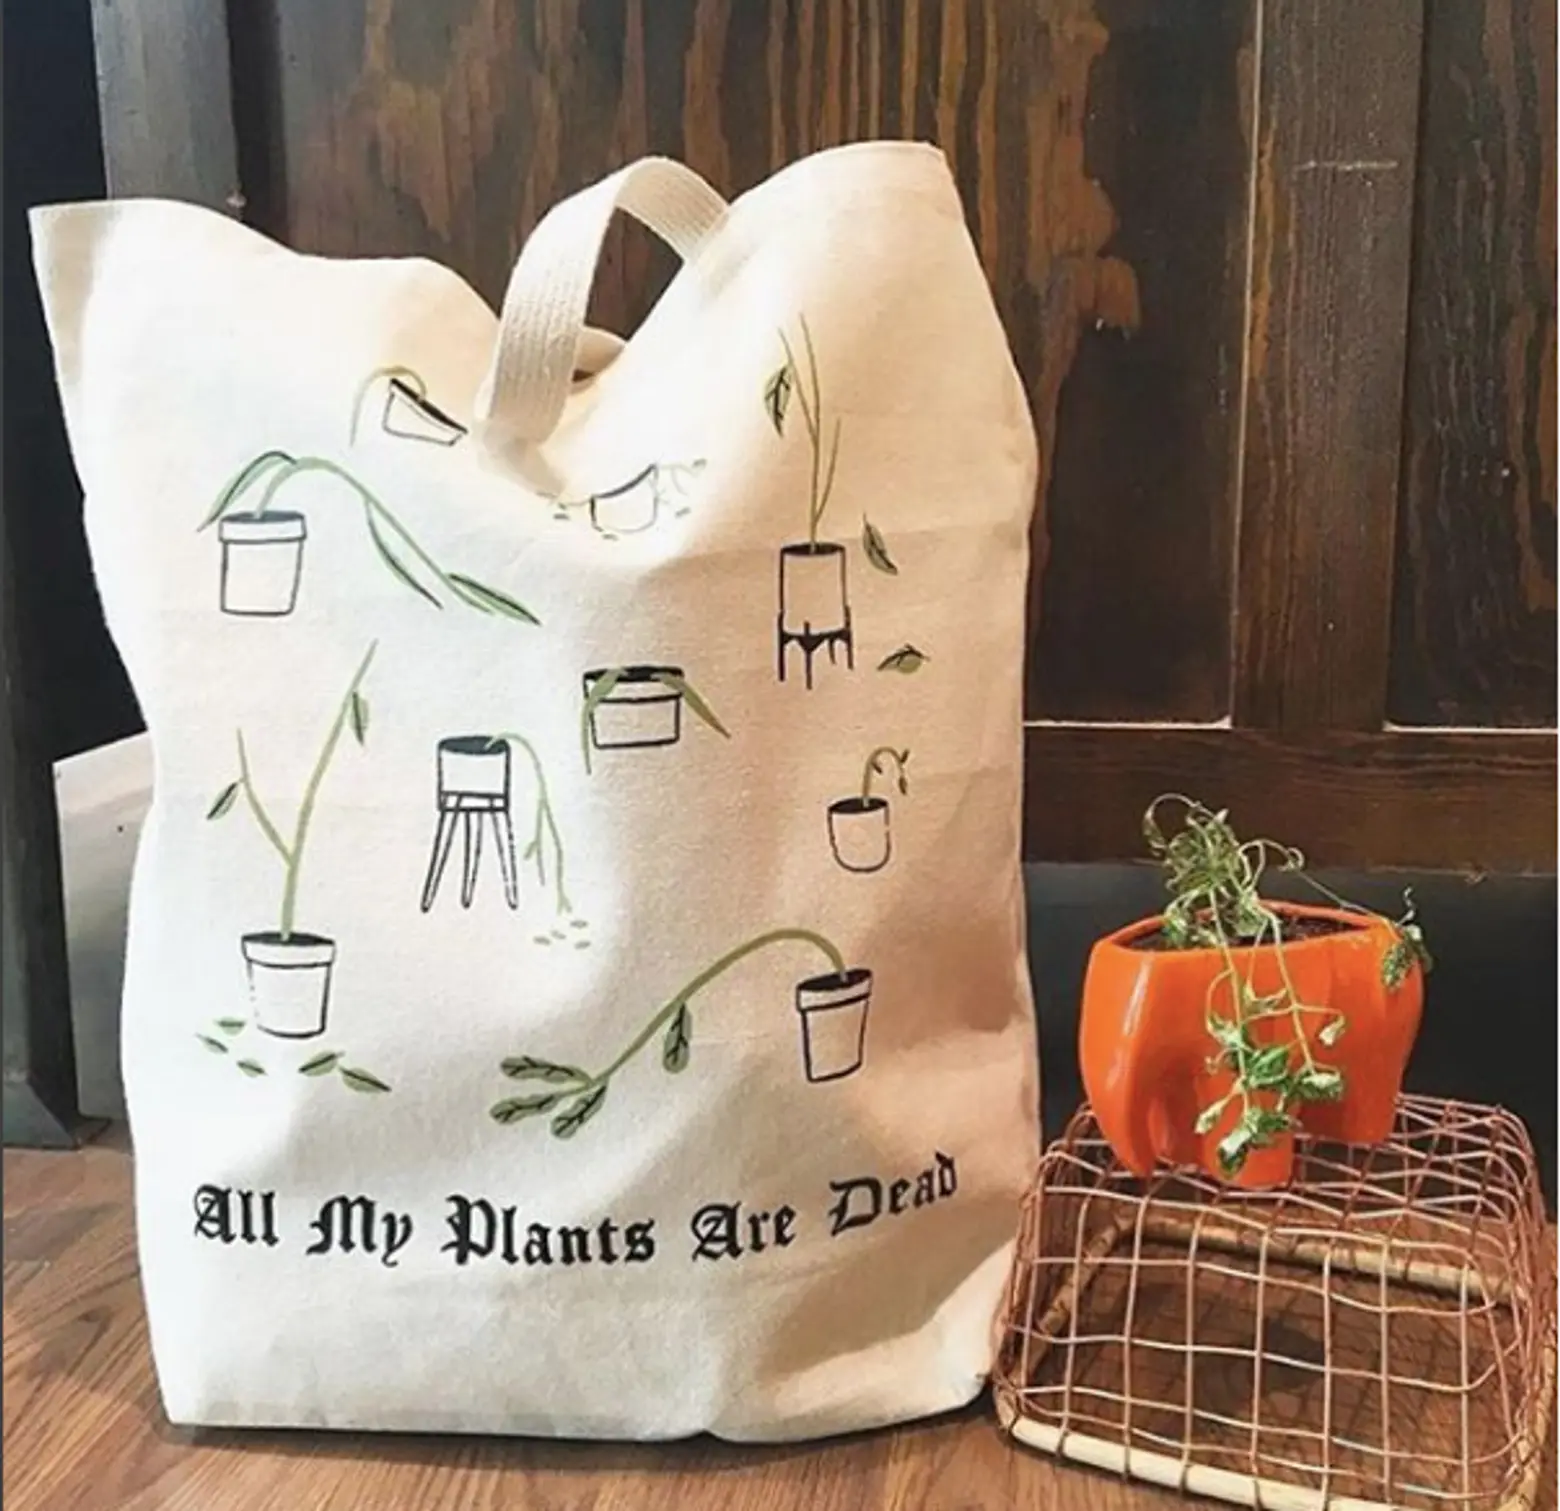 all my plants are dead tote bag